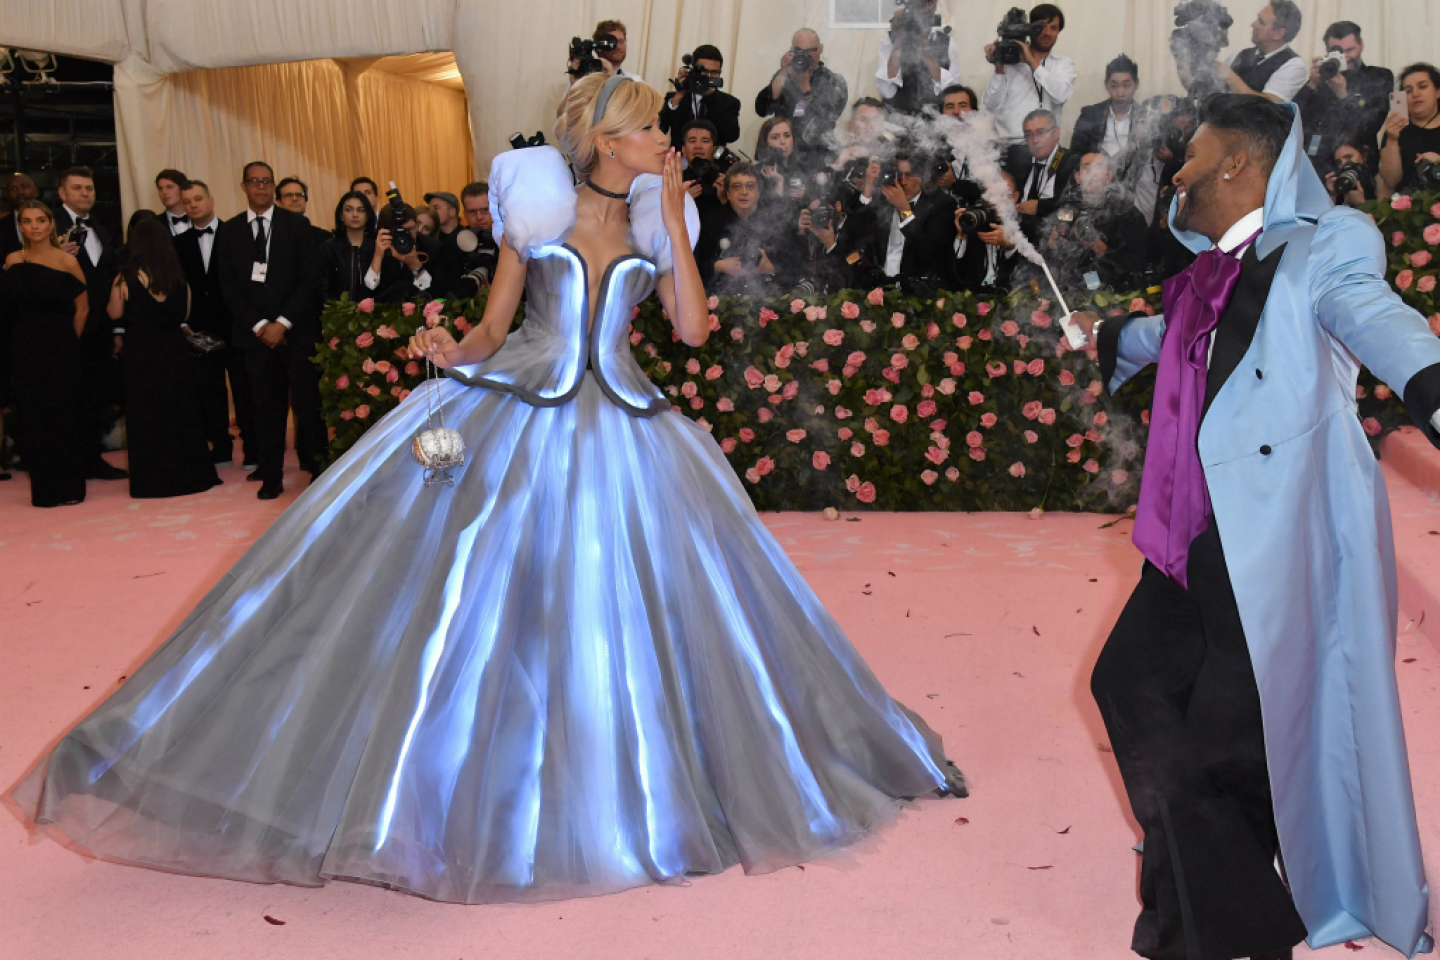 From Cinderella to Jiffy Lube: Hits and misses from the 2019 Met Gala ...